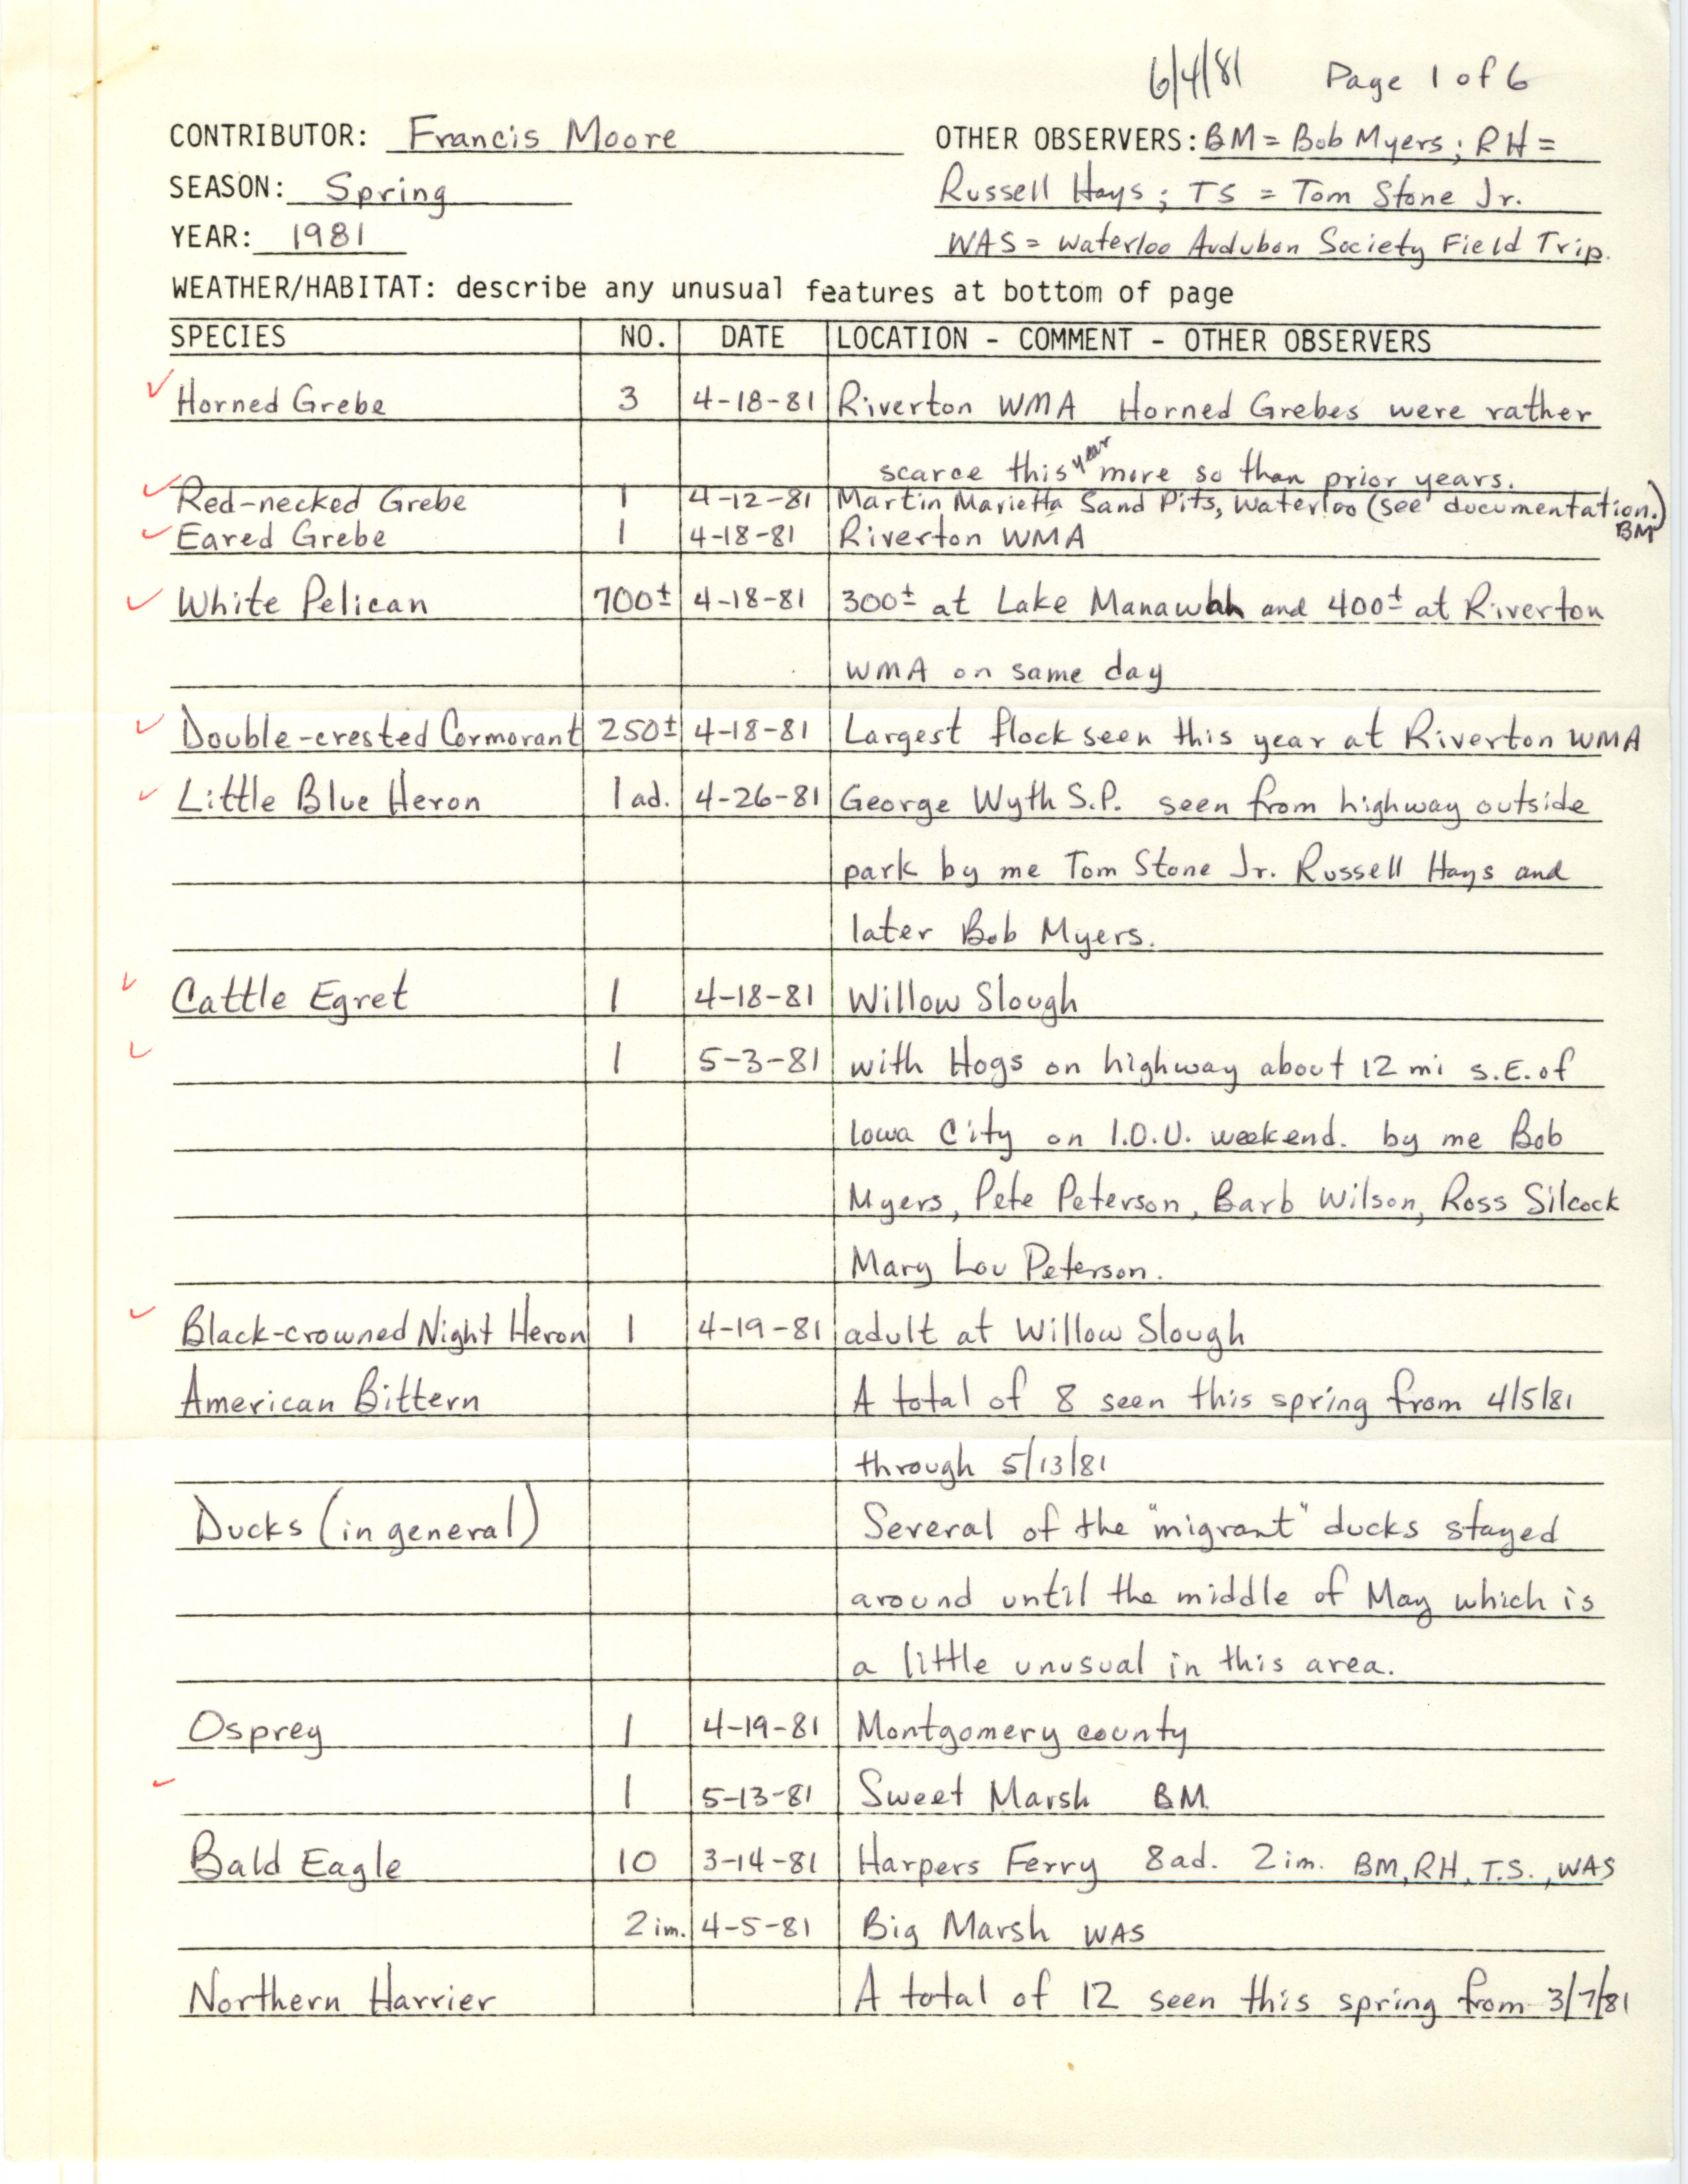 Annotated bird sighting list for spring 1981 compiled by Francis Moore